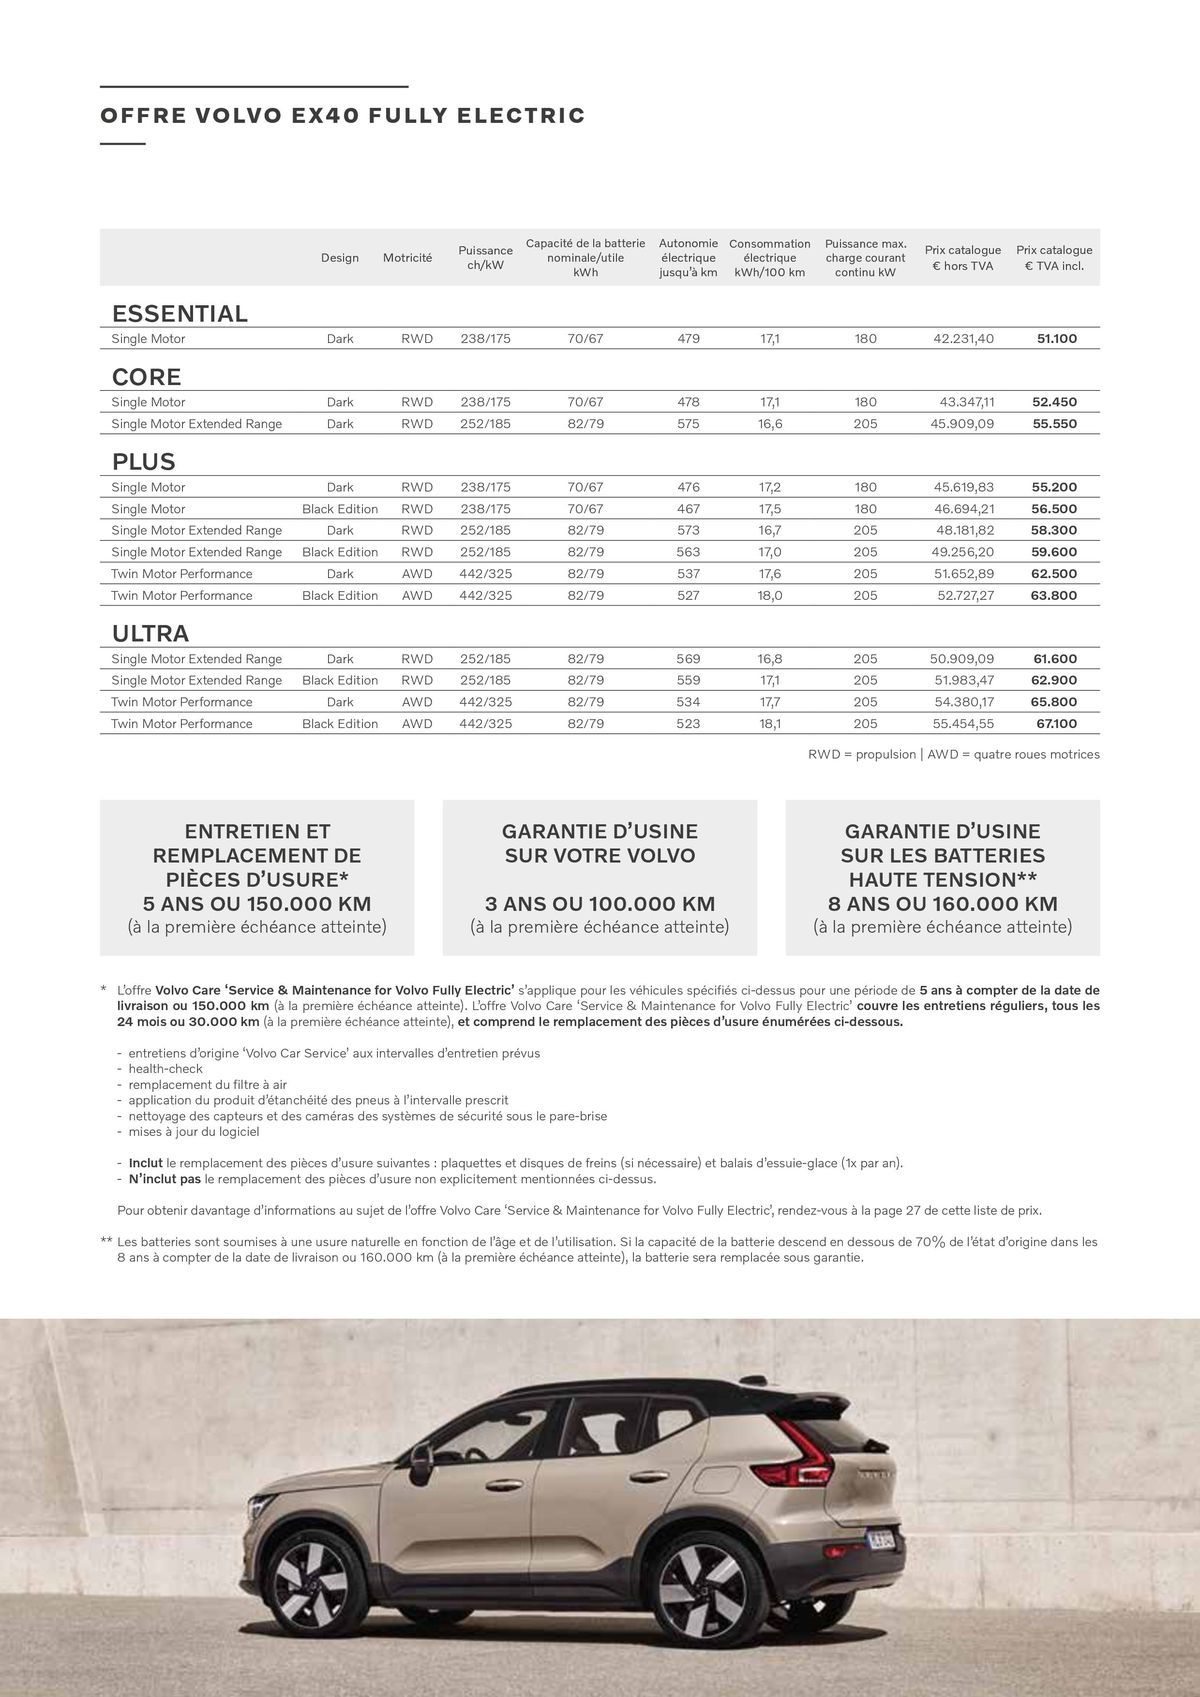 Catalogue VOLVO EX40 FULLY ELECTRIC, page 00003